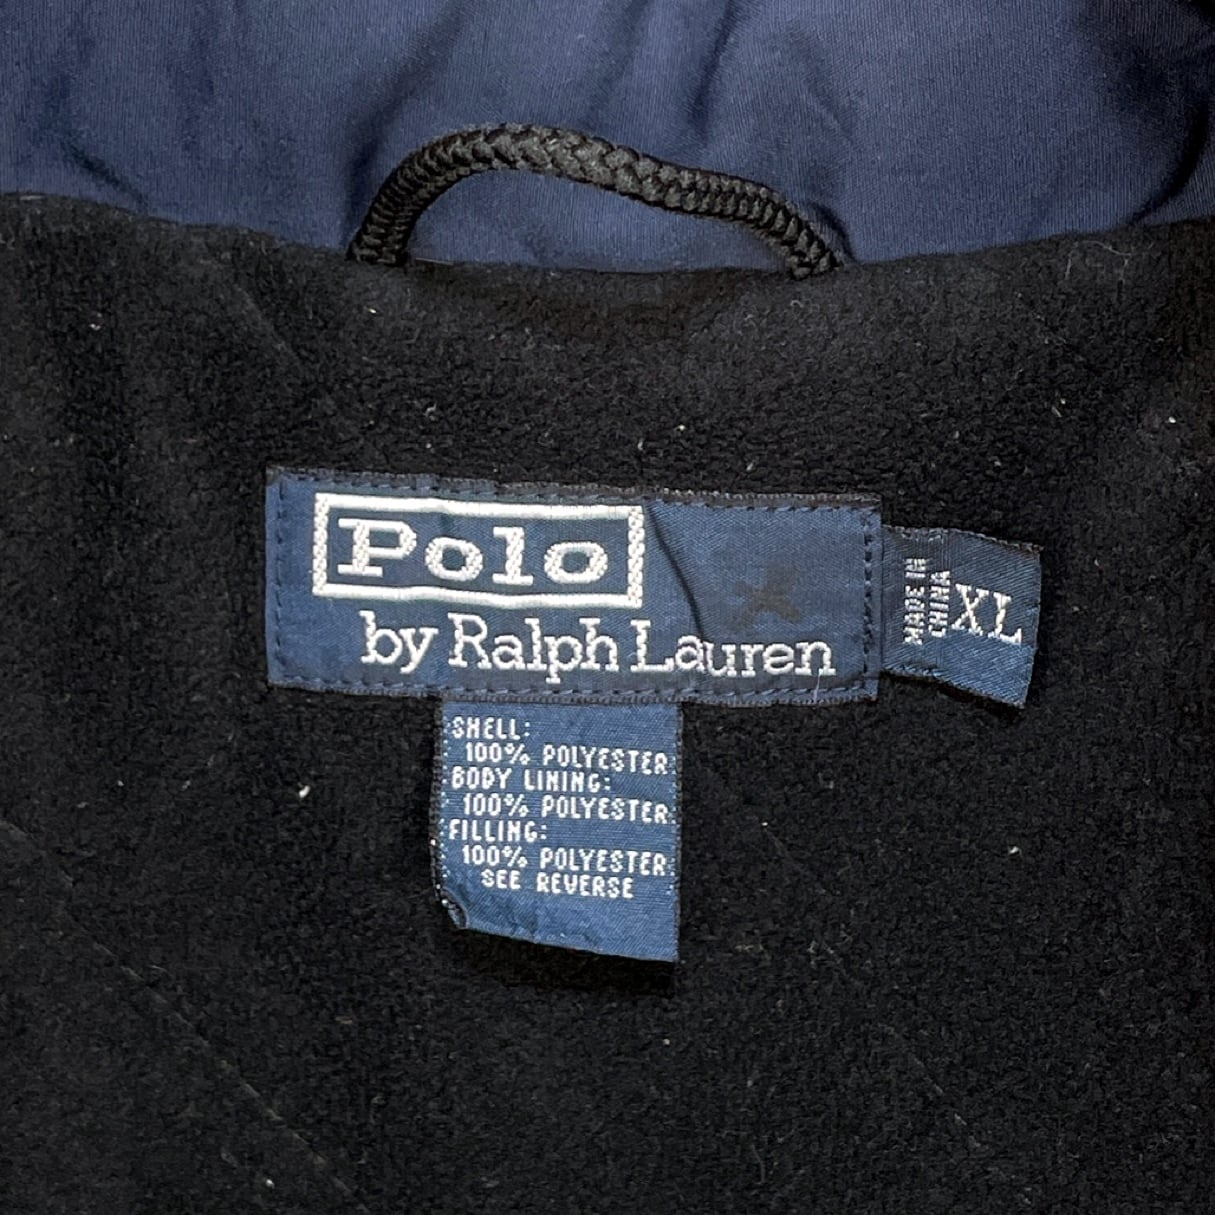 90's Polo by Ralph Lauren ナイロンジャケット 刺繍ロゴ 裏フリース | 古着屋mills powered by BASE